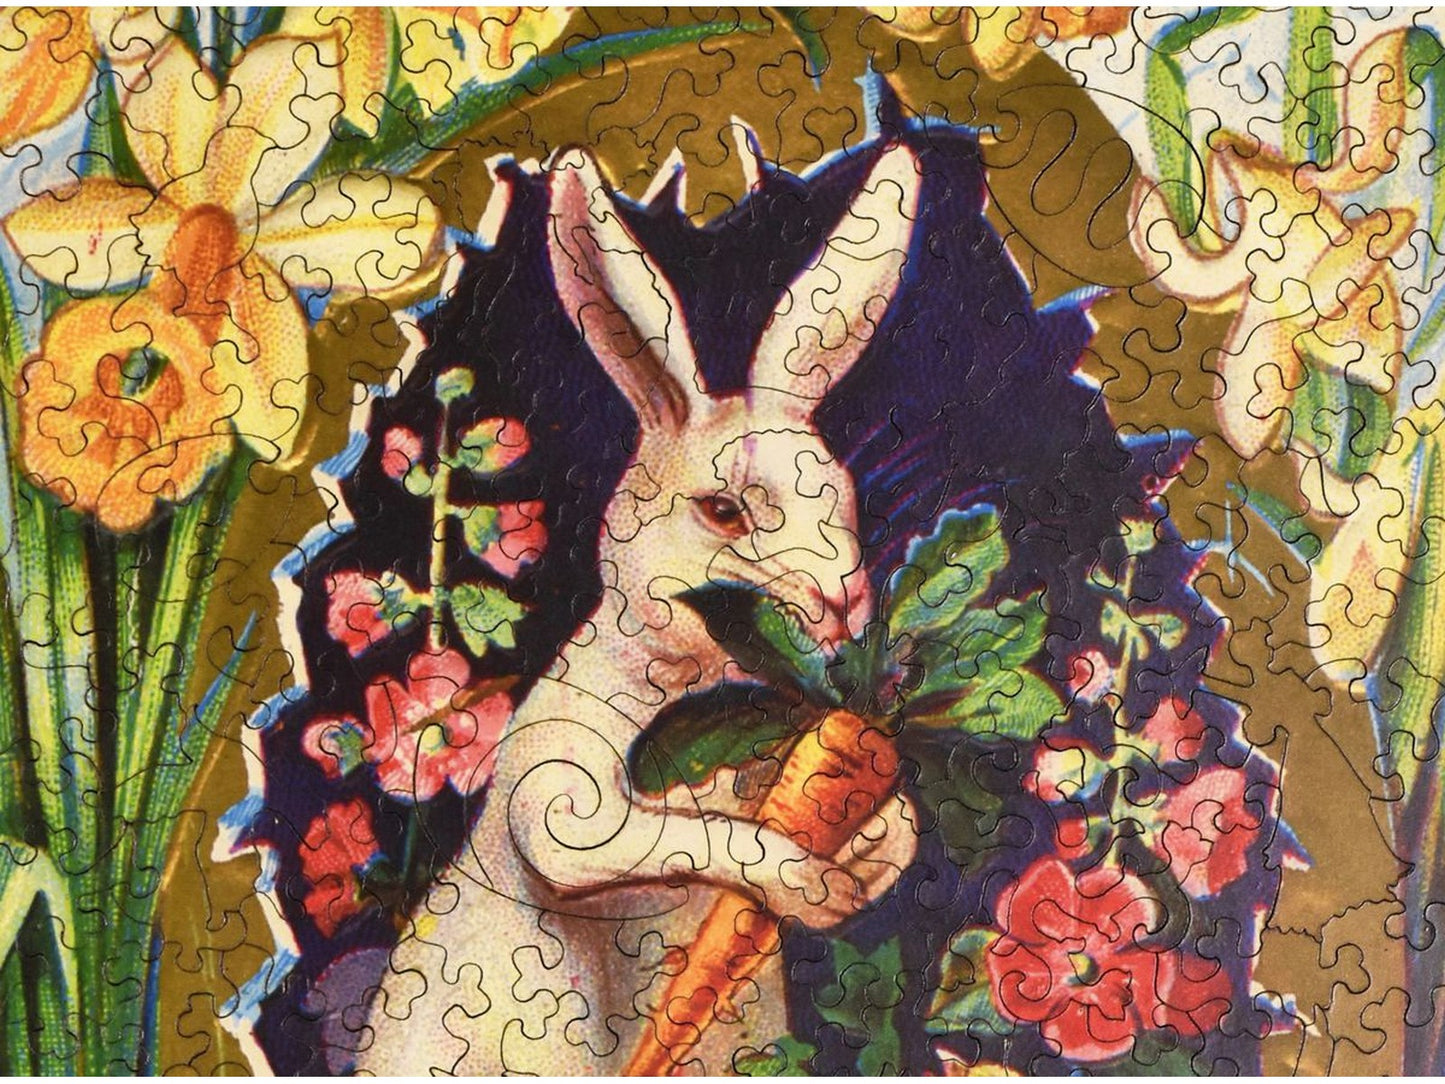 A closeup of the front of the puzzle, Easter Egg Rabbit, showing the detail in the pieces.